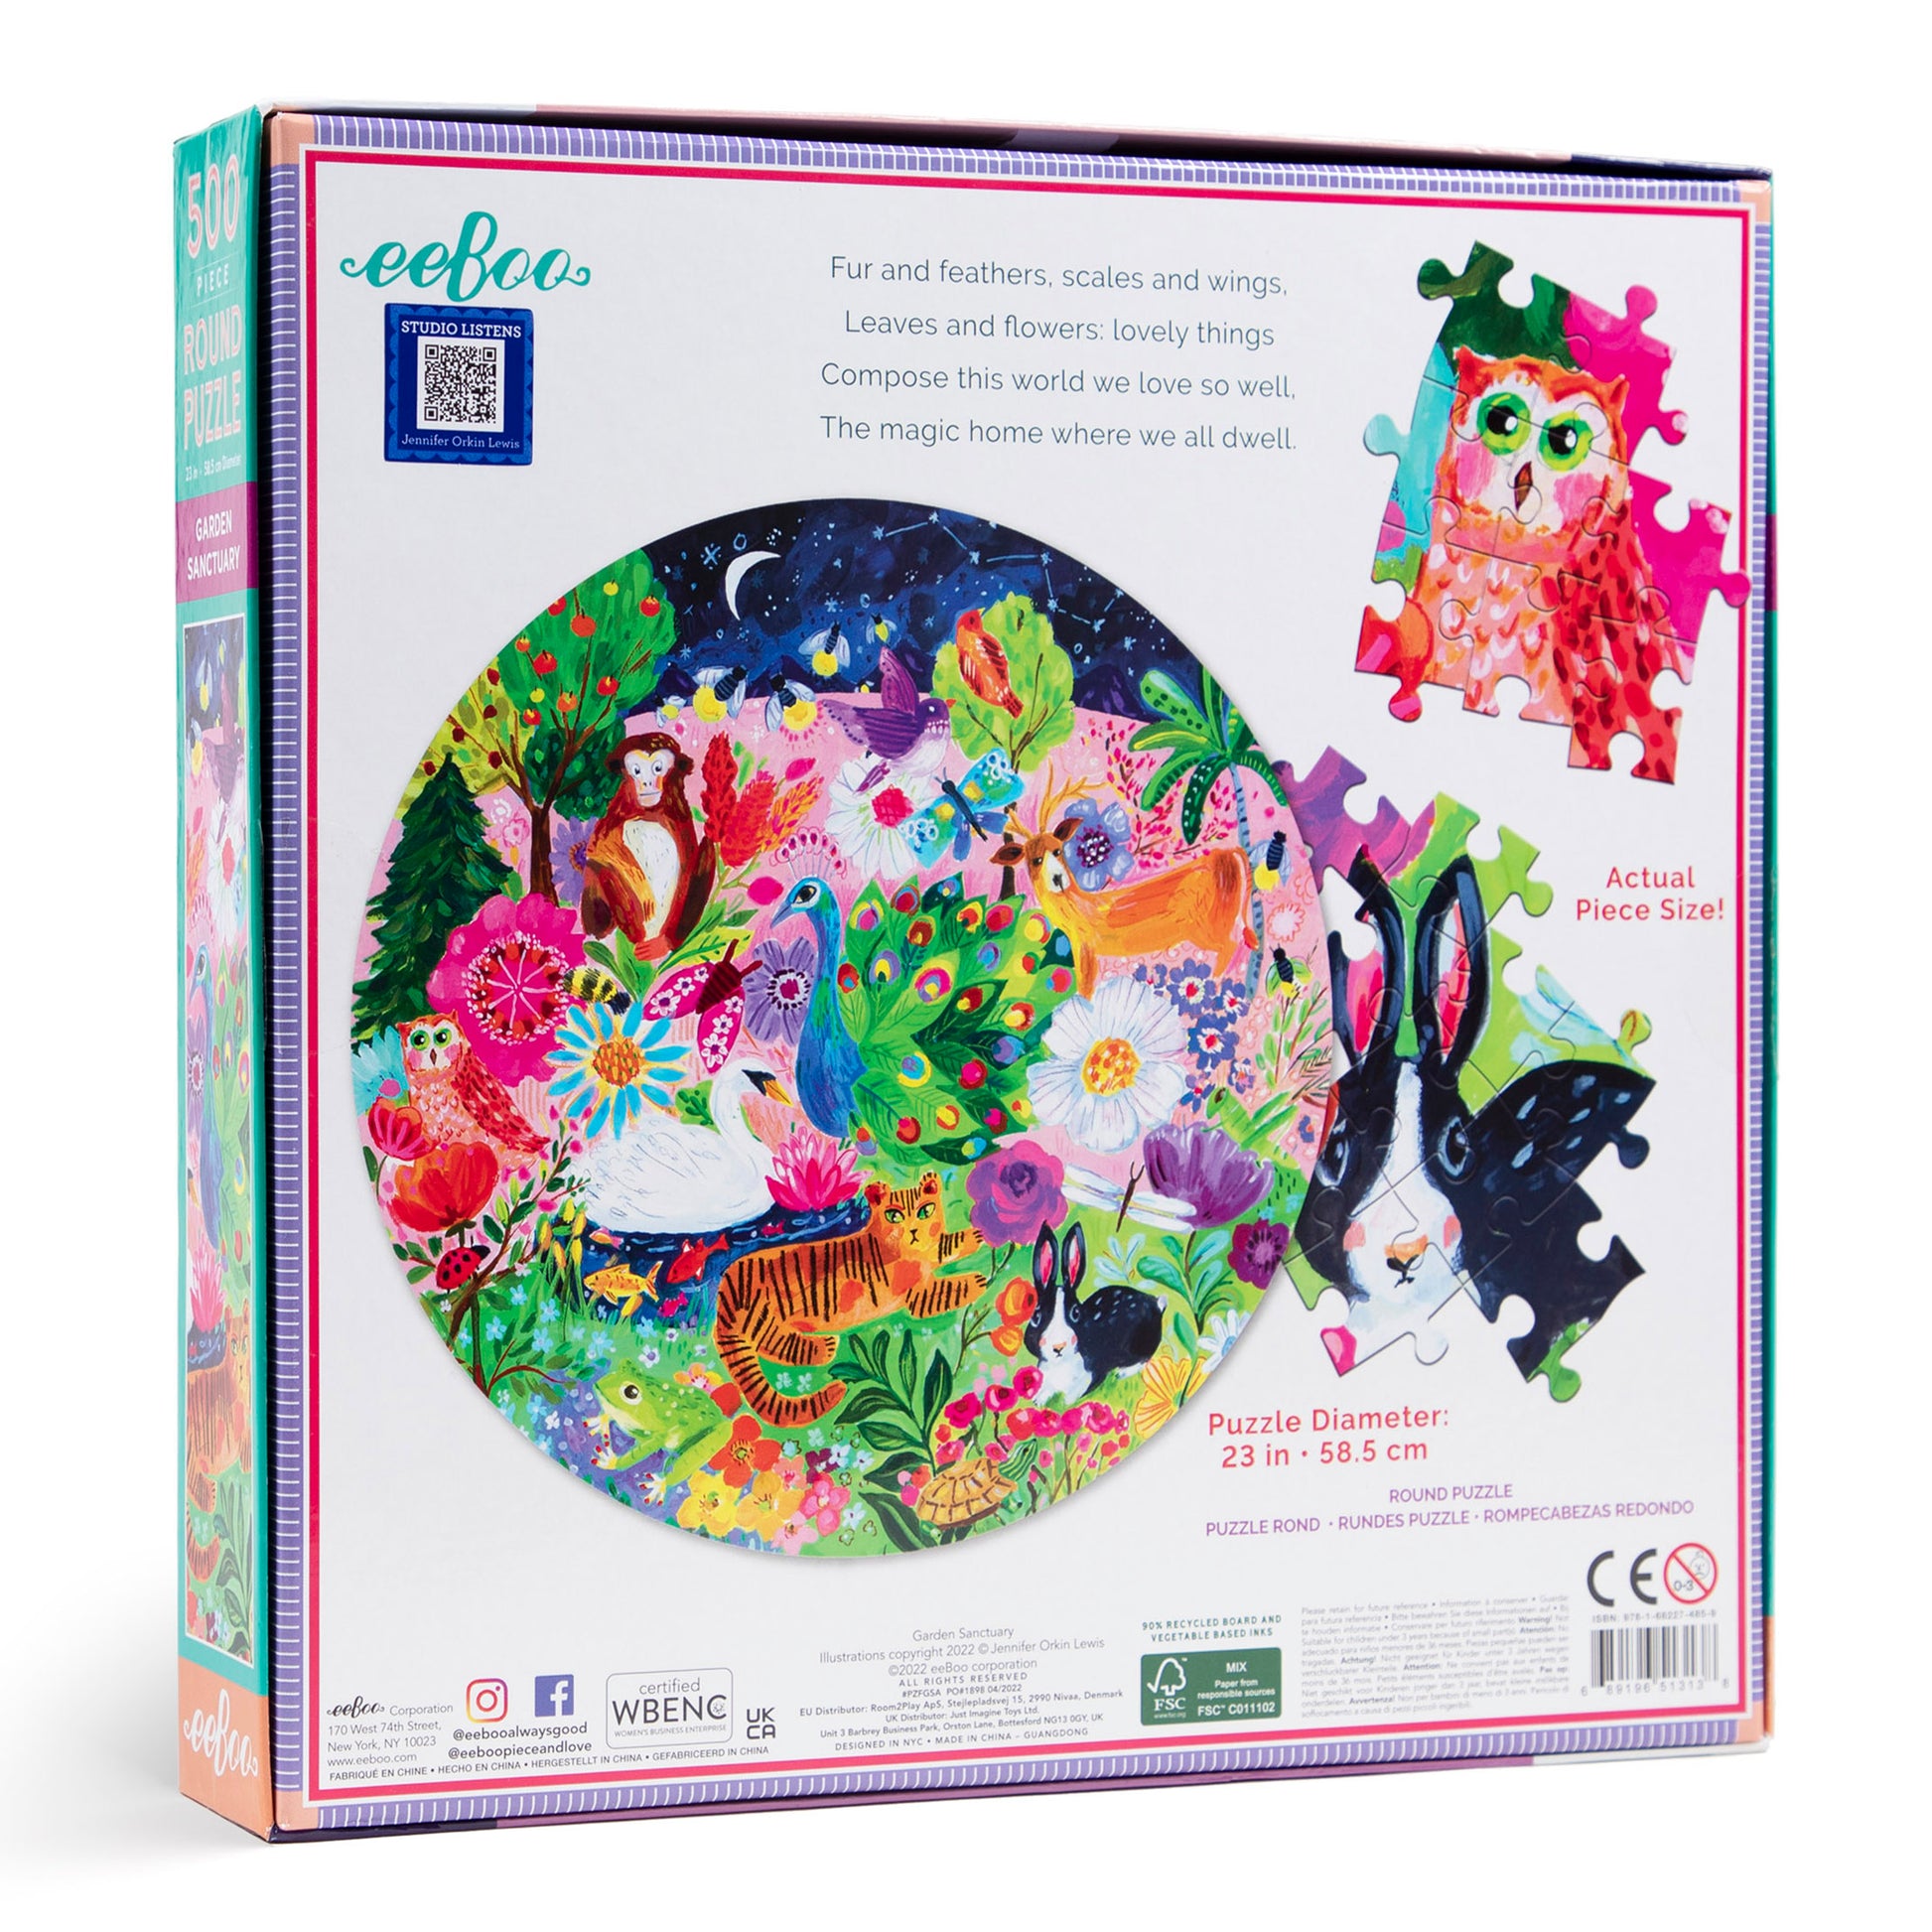 Garden Sanctuary 500 Piece Round Jigsaw Puzzle eeBoo Gifts for 14+